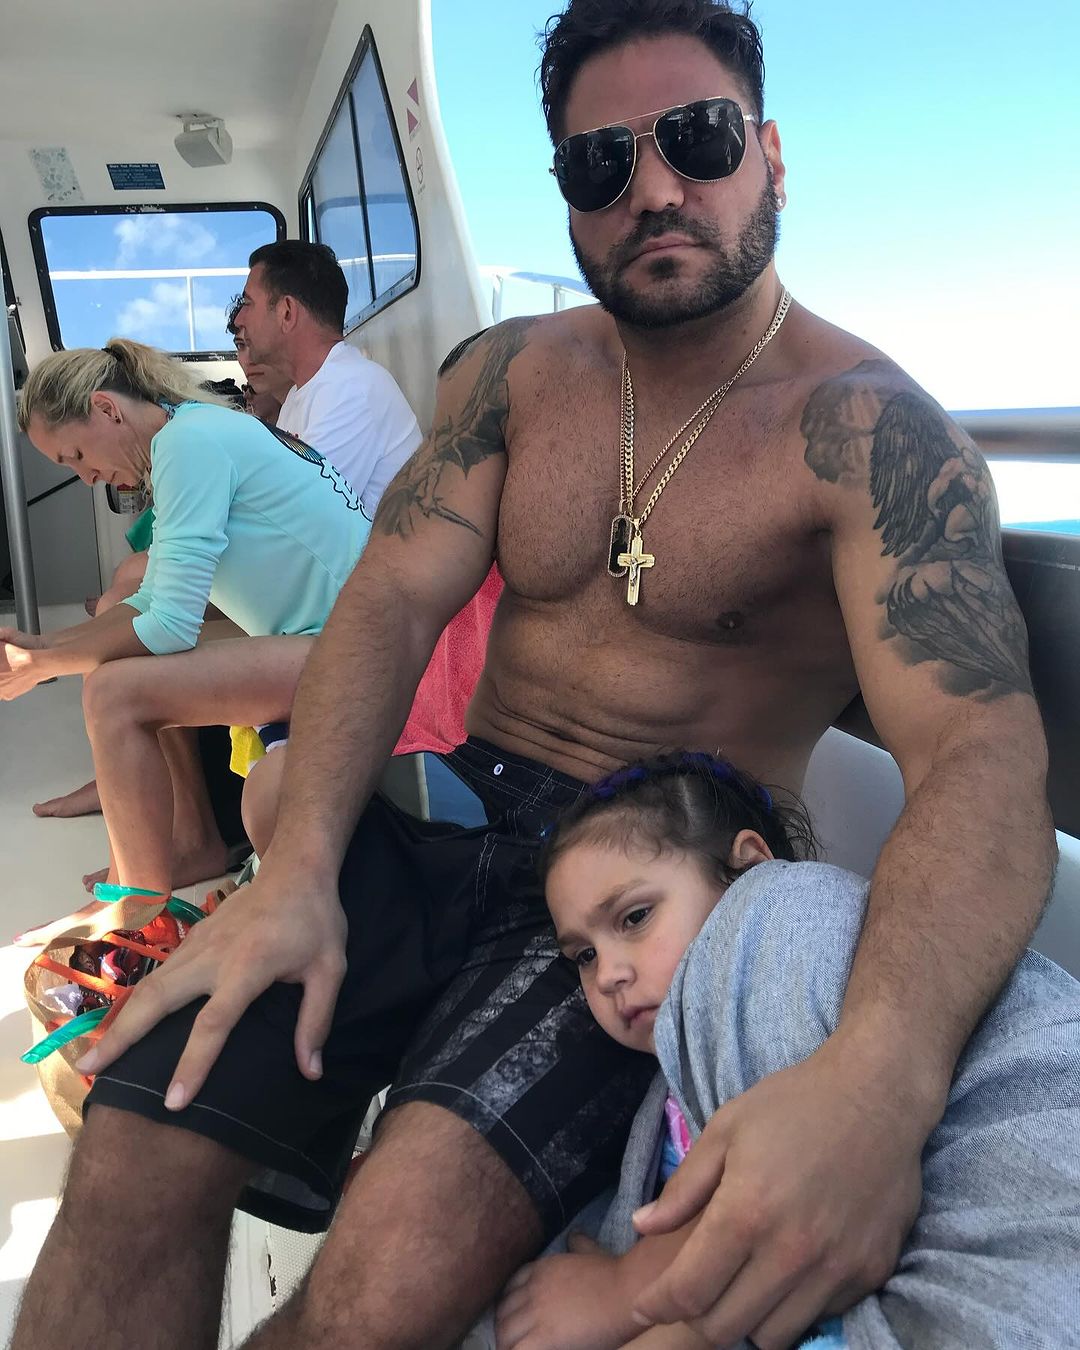 The TV personality excited fans when he shared photos of him enjoying a boat ride in Miami, Florida, with his daughter in honor of her birthday